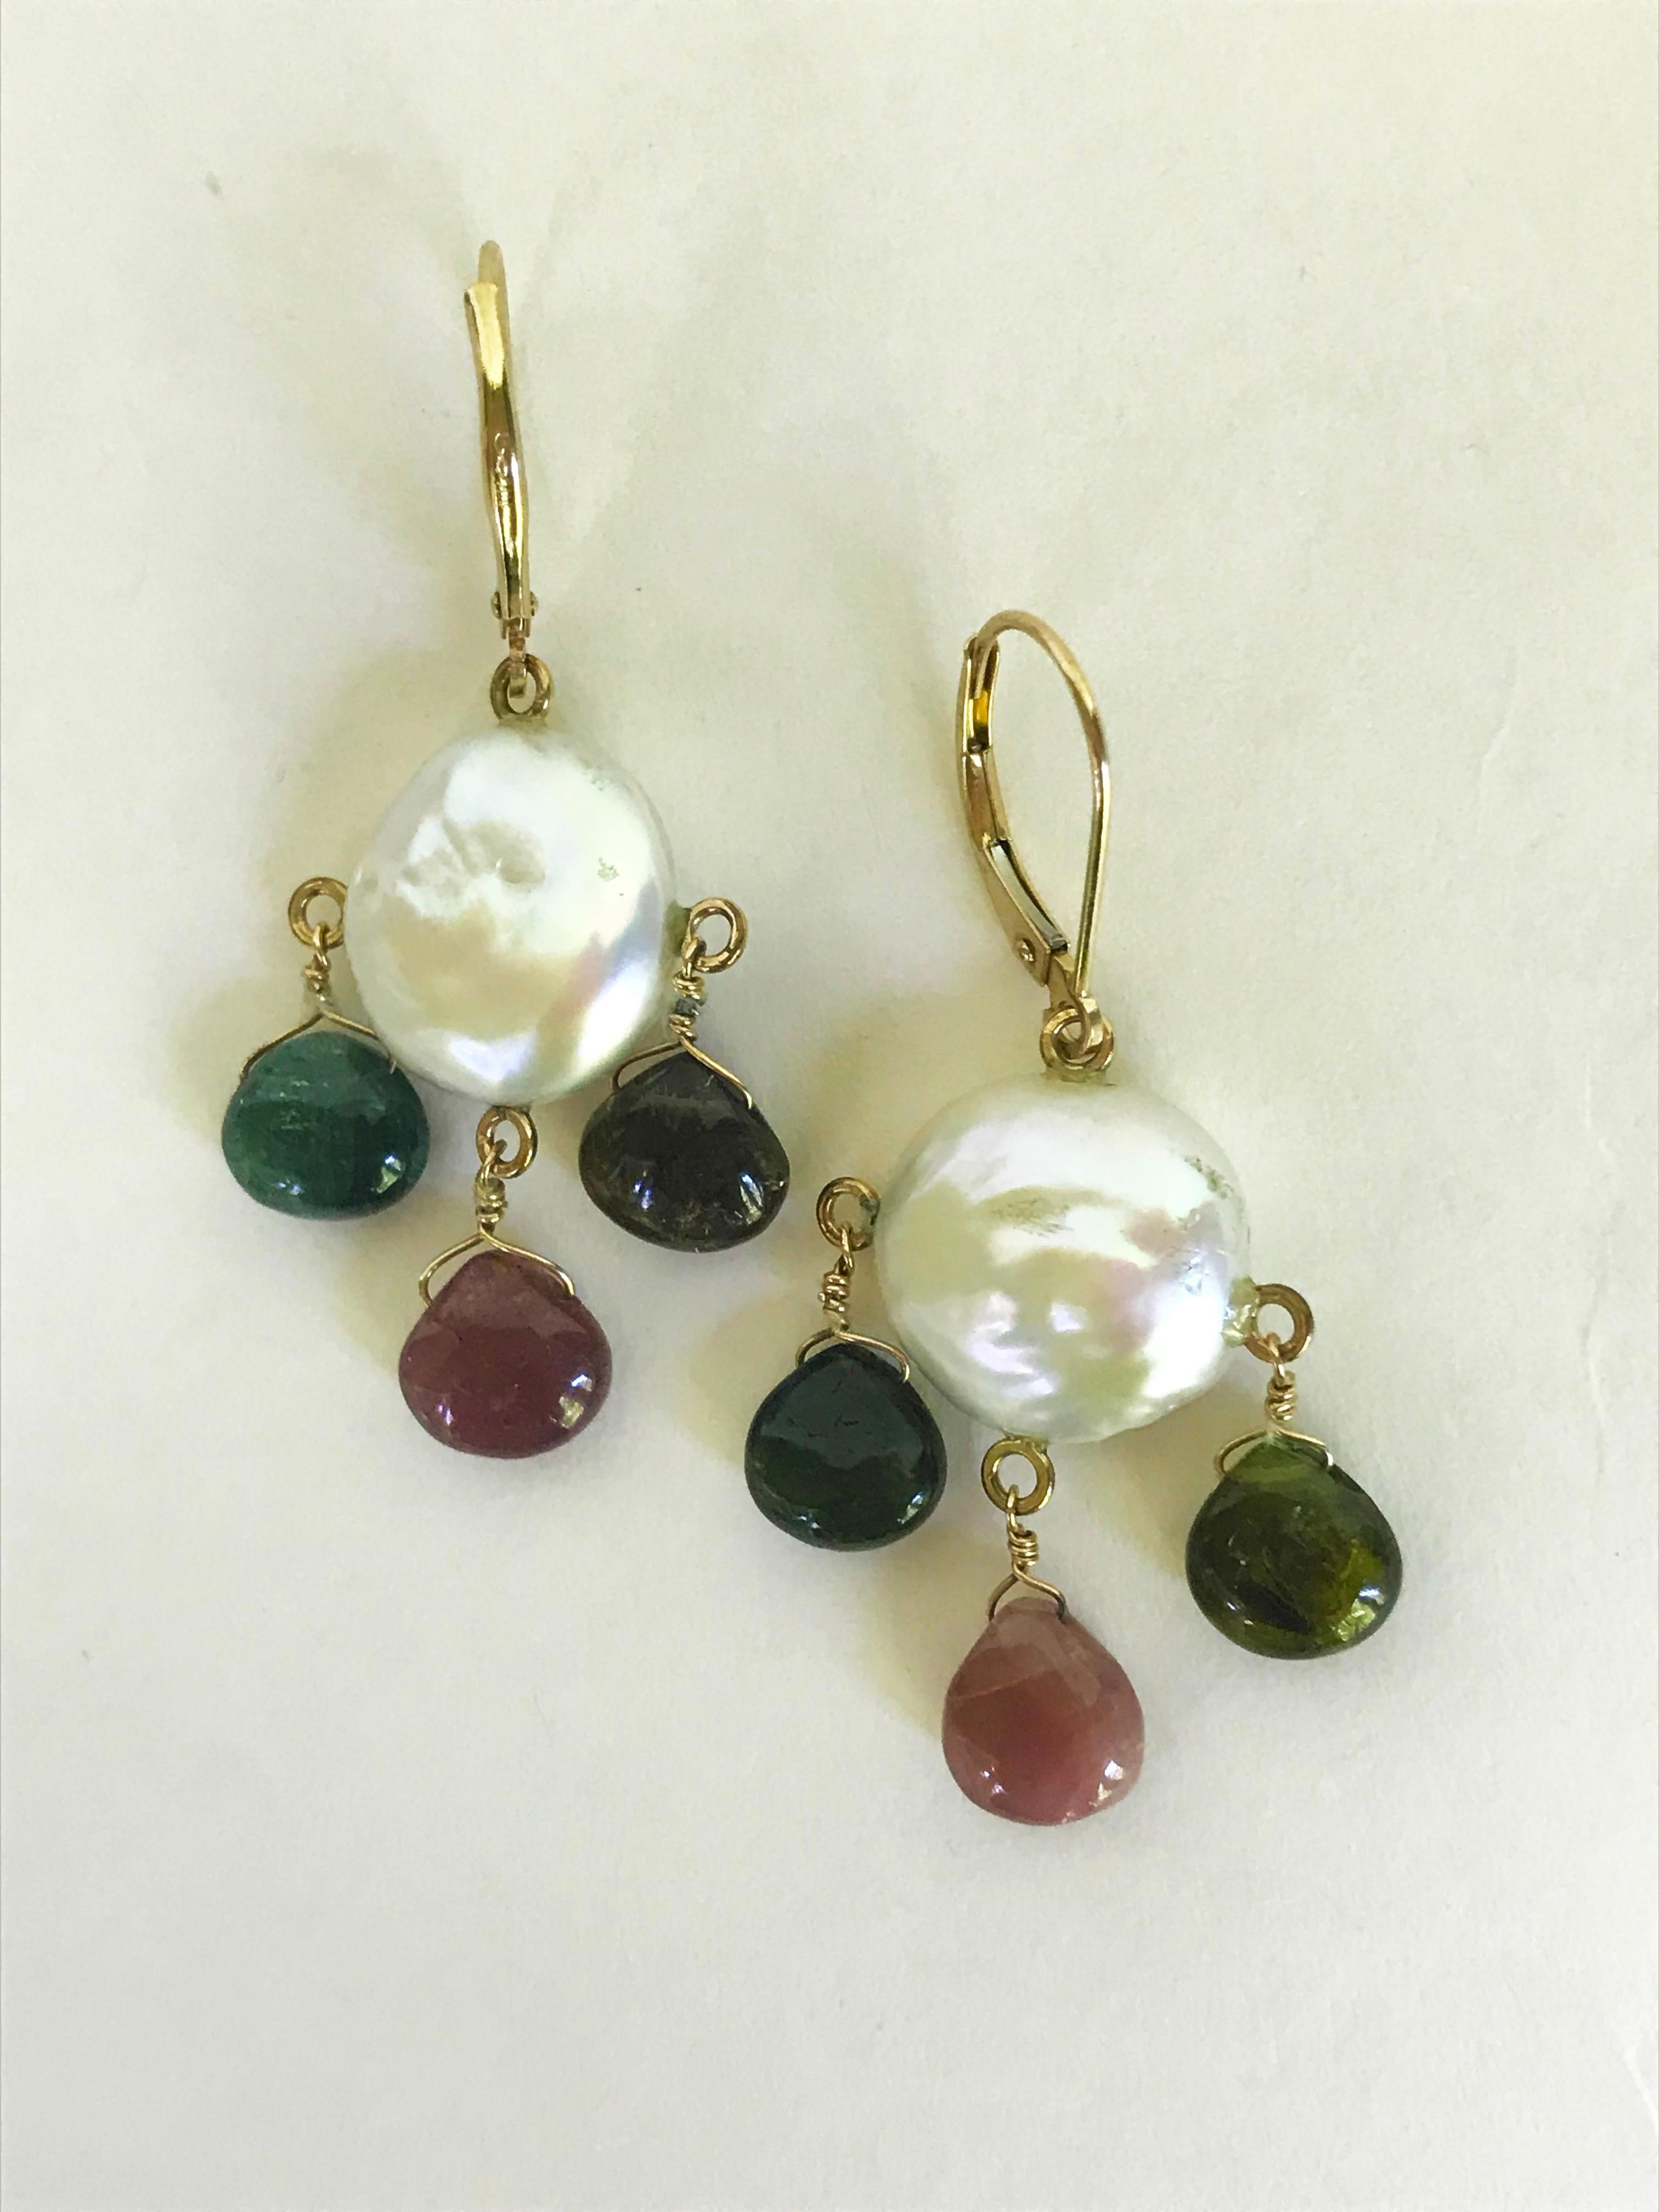 These beautiful earrings are made from 14k yellow gold wiring and Lever-back. The multi-color tourmalines drop from a flat coin-shaped white pearl. Inspired by an Autumn-themed color palette, these elegant yet whimsical earrings are intentionally